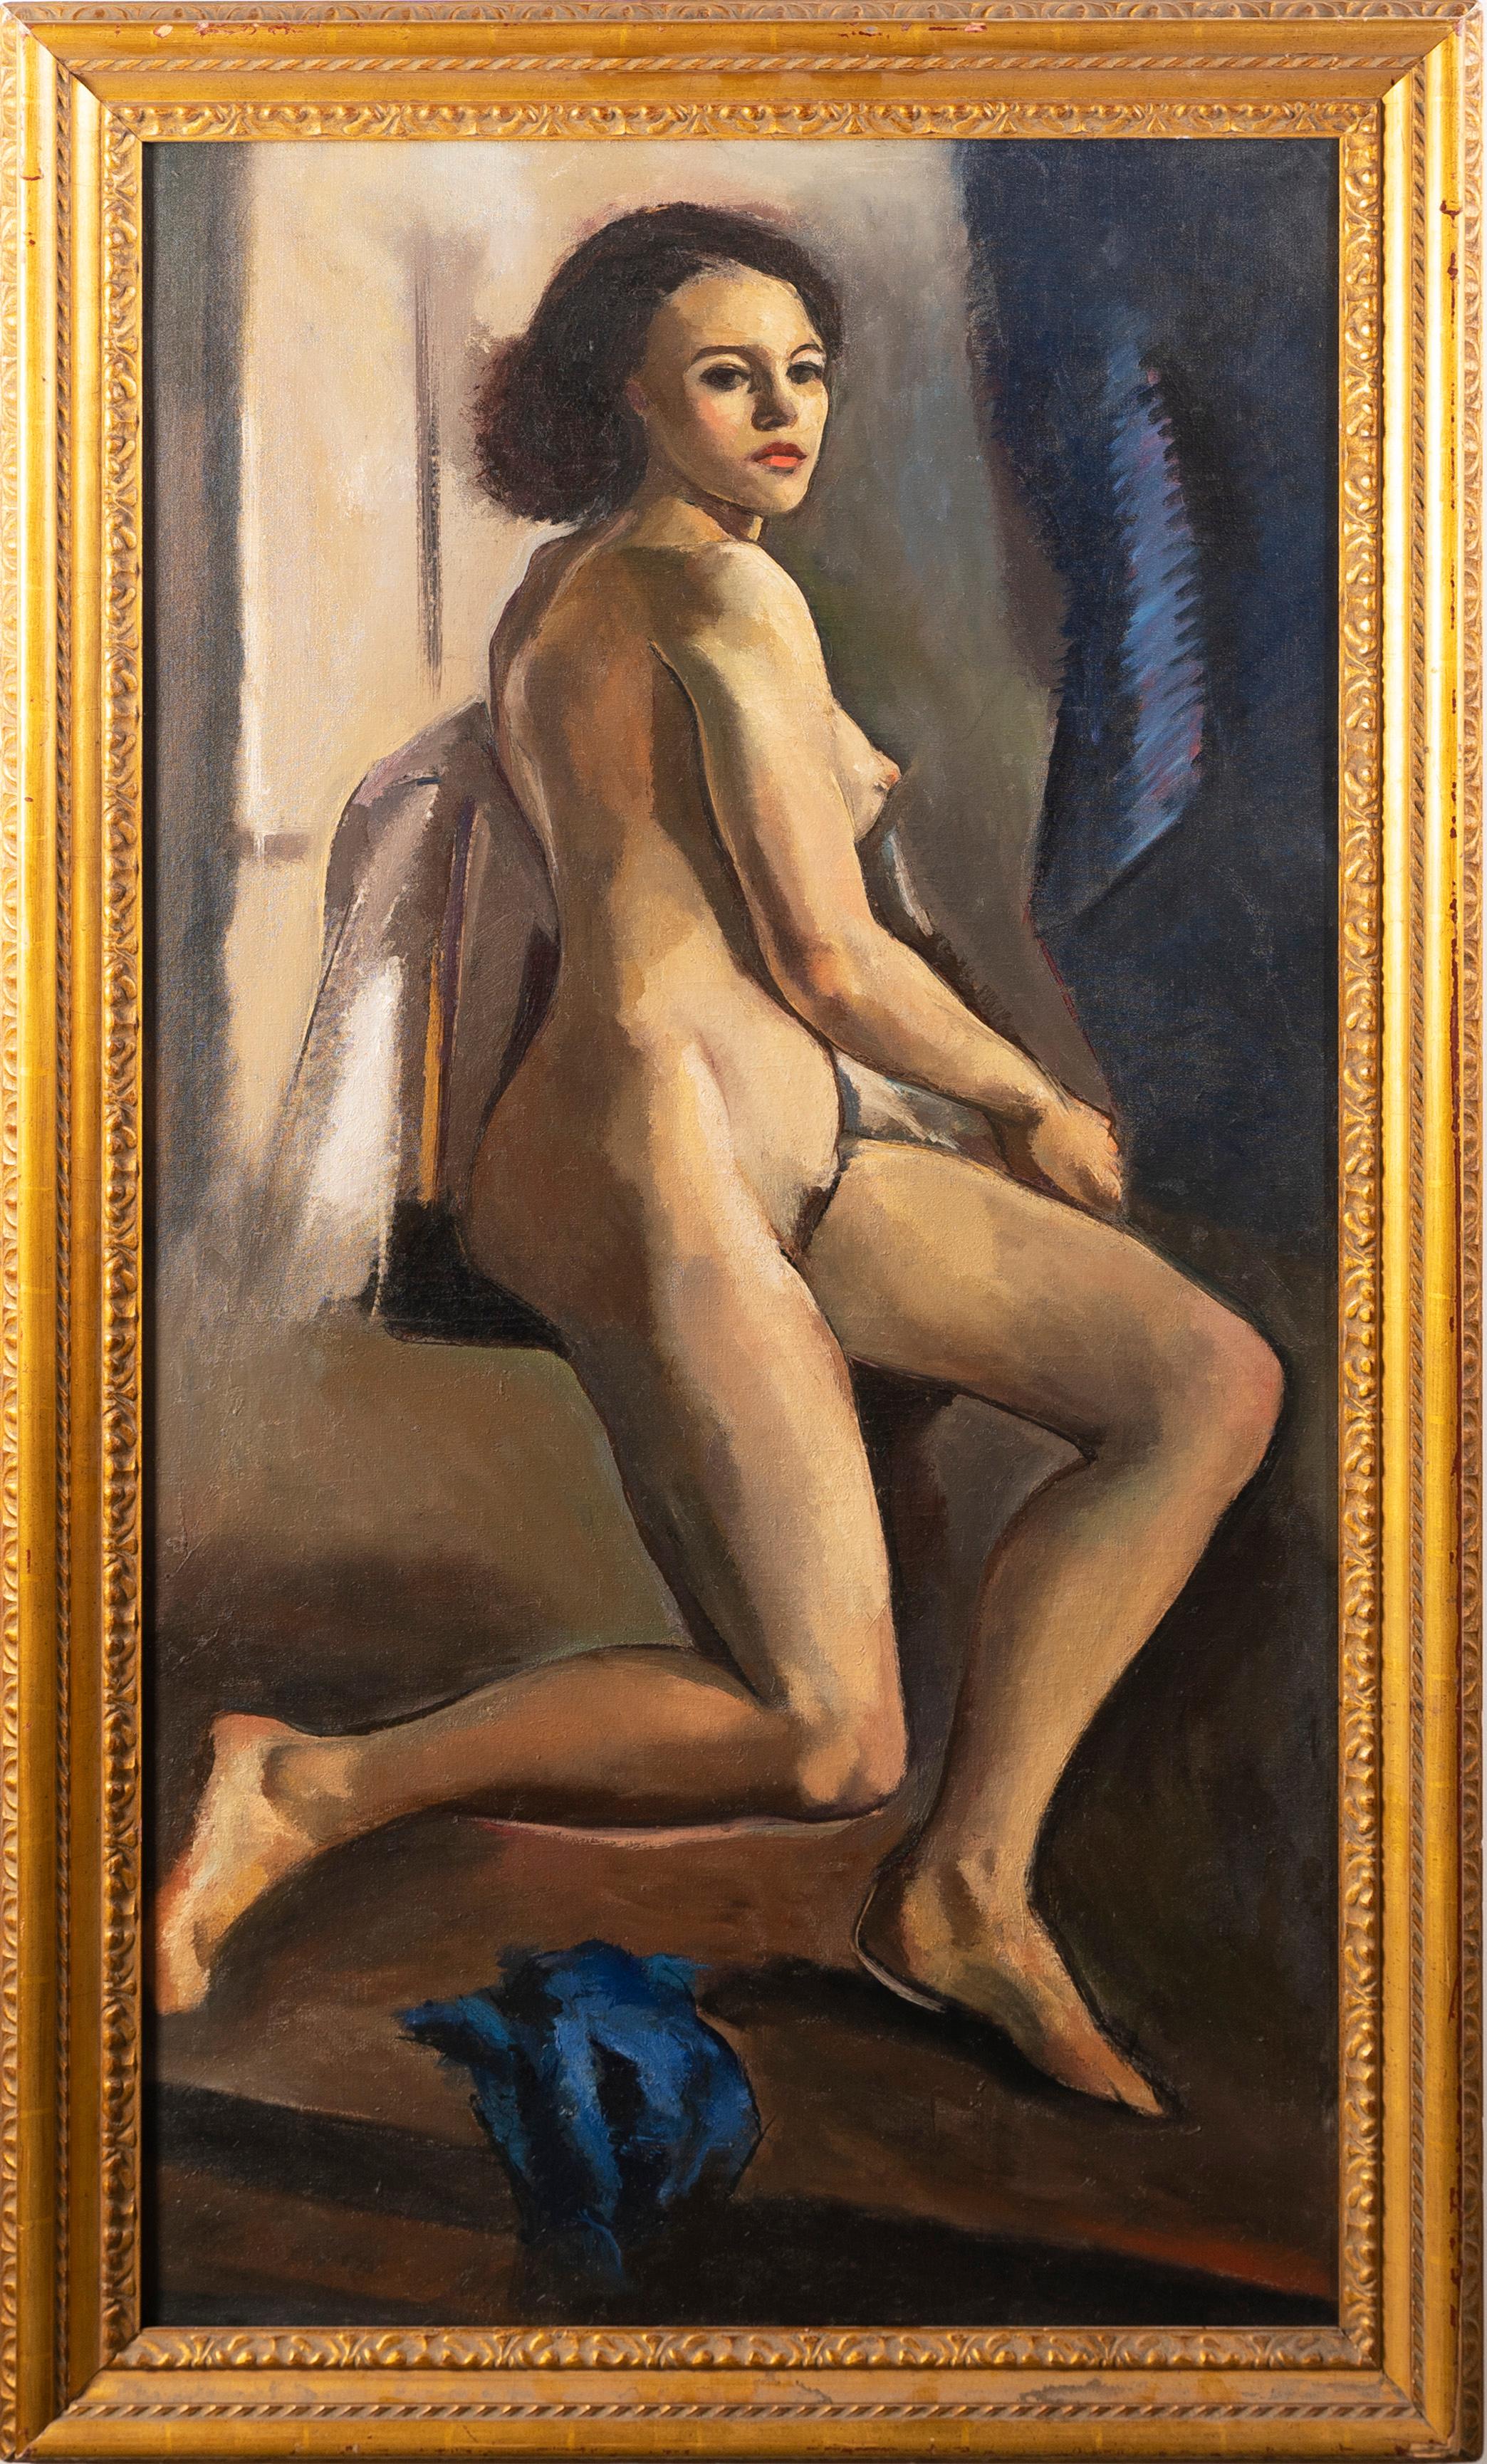 Antique American modernist nude woman in an artist studio oil painting.  Oil on canvas, circa 1930.  No signature found.  Image size, 34L x 64H.  Housed in a giltwood frame.